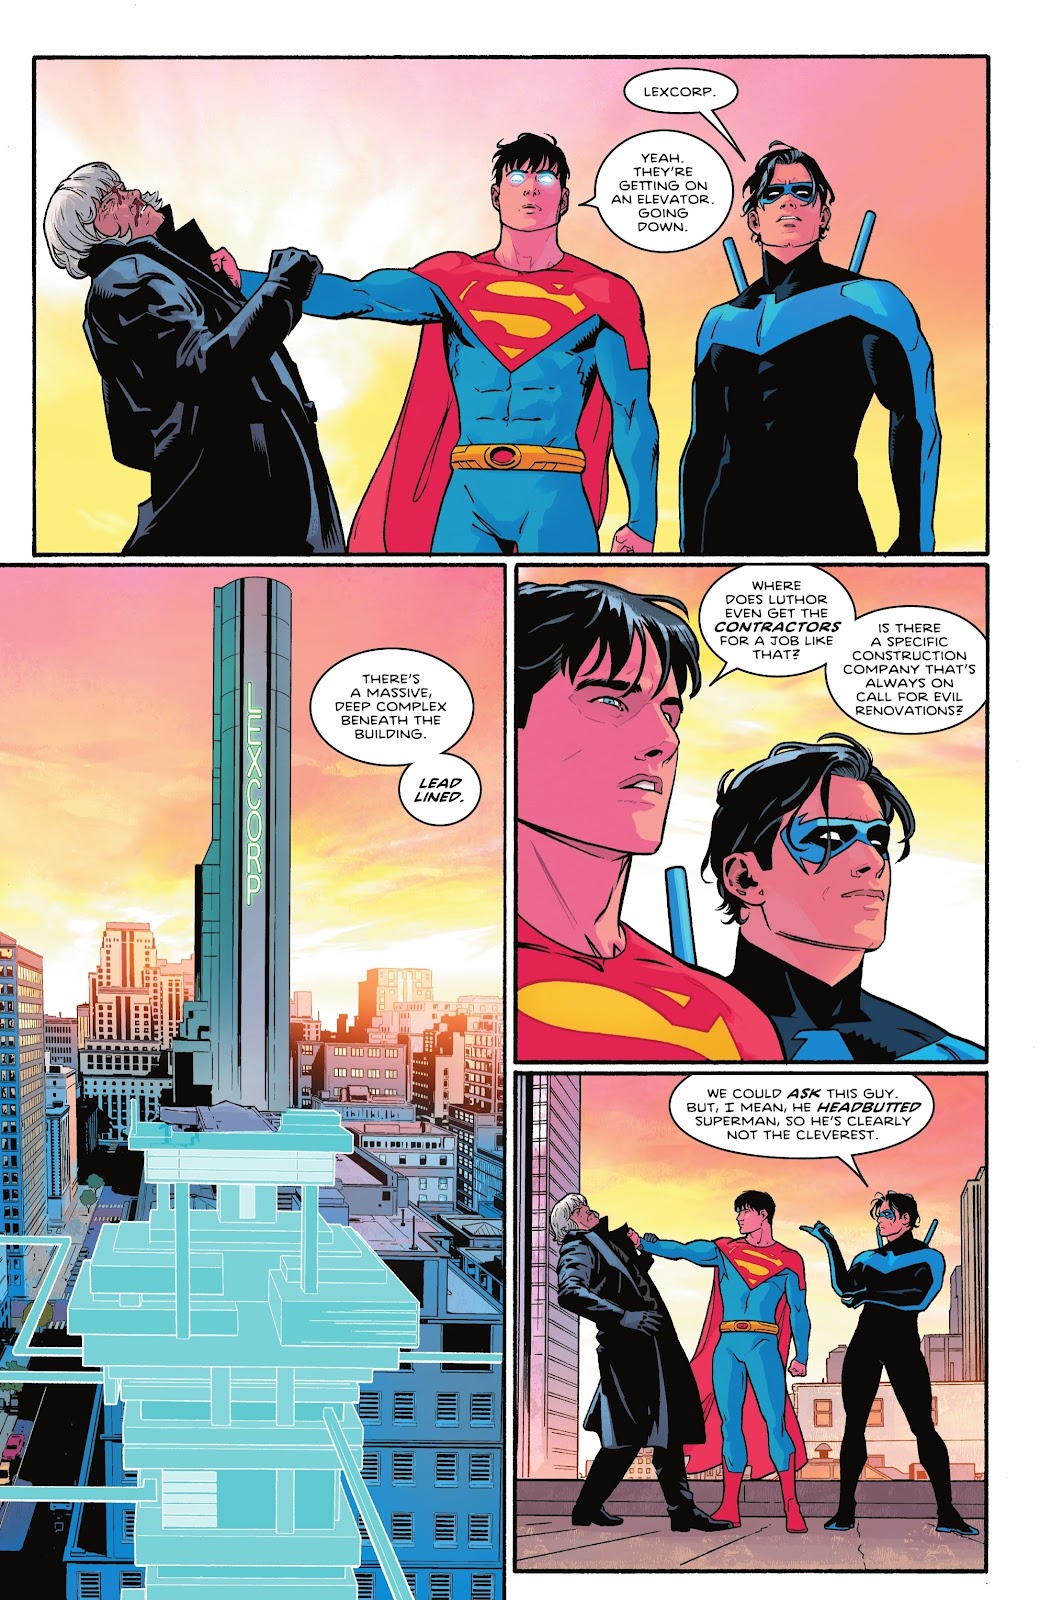 Superman And Nightwing VS The Rising